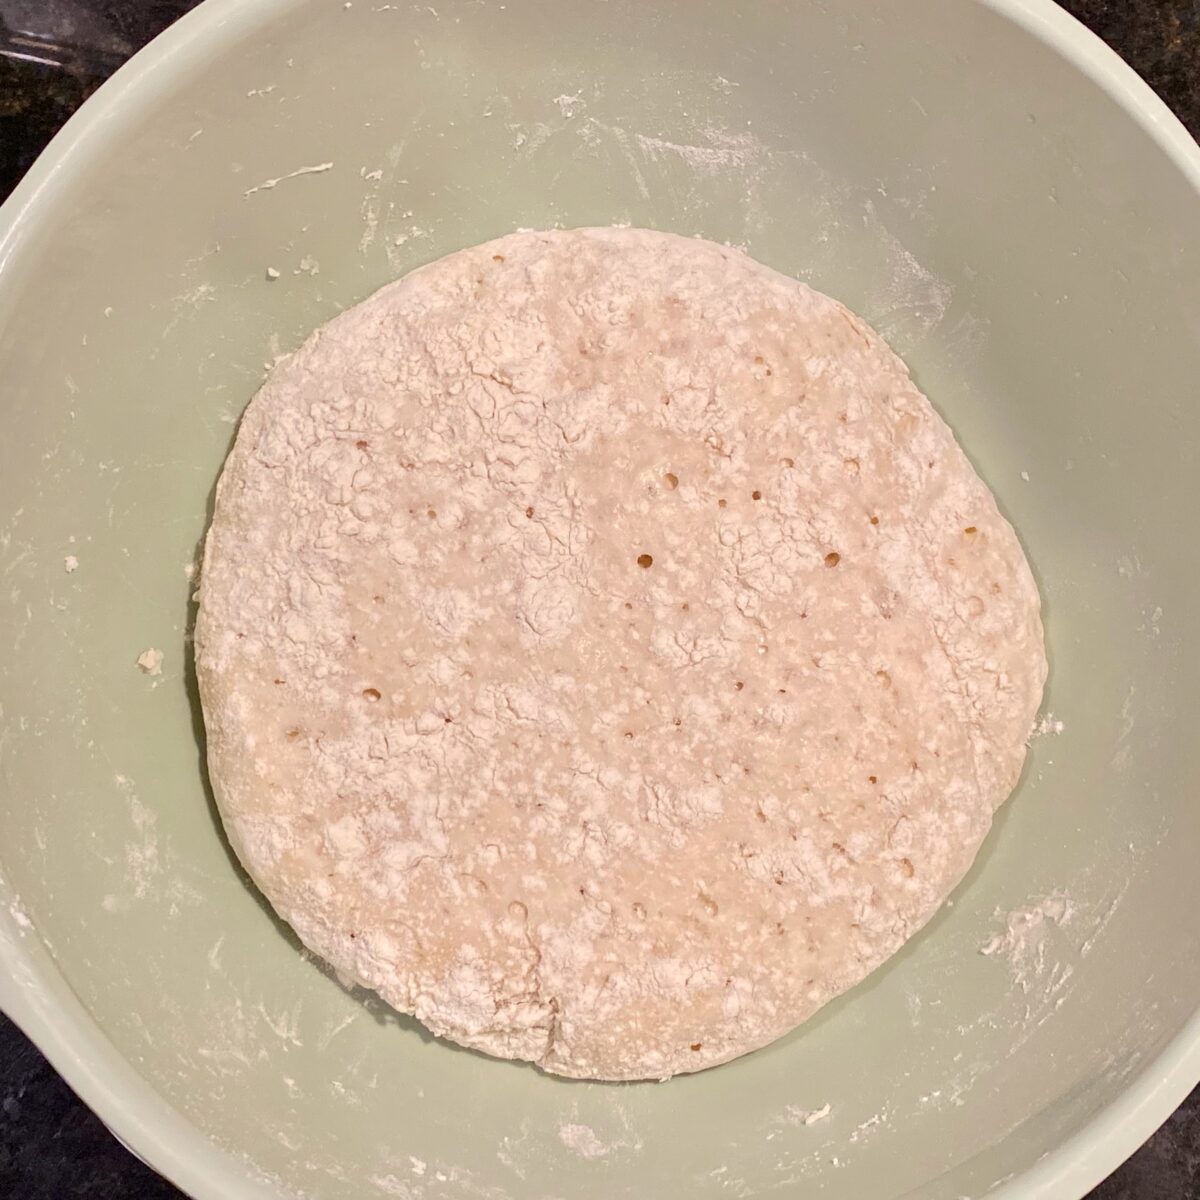 The dough, ready to be dumped from the bowl onto a well-floured work surface.